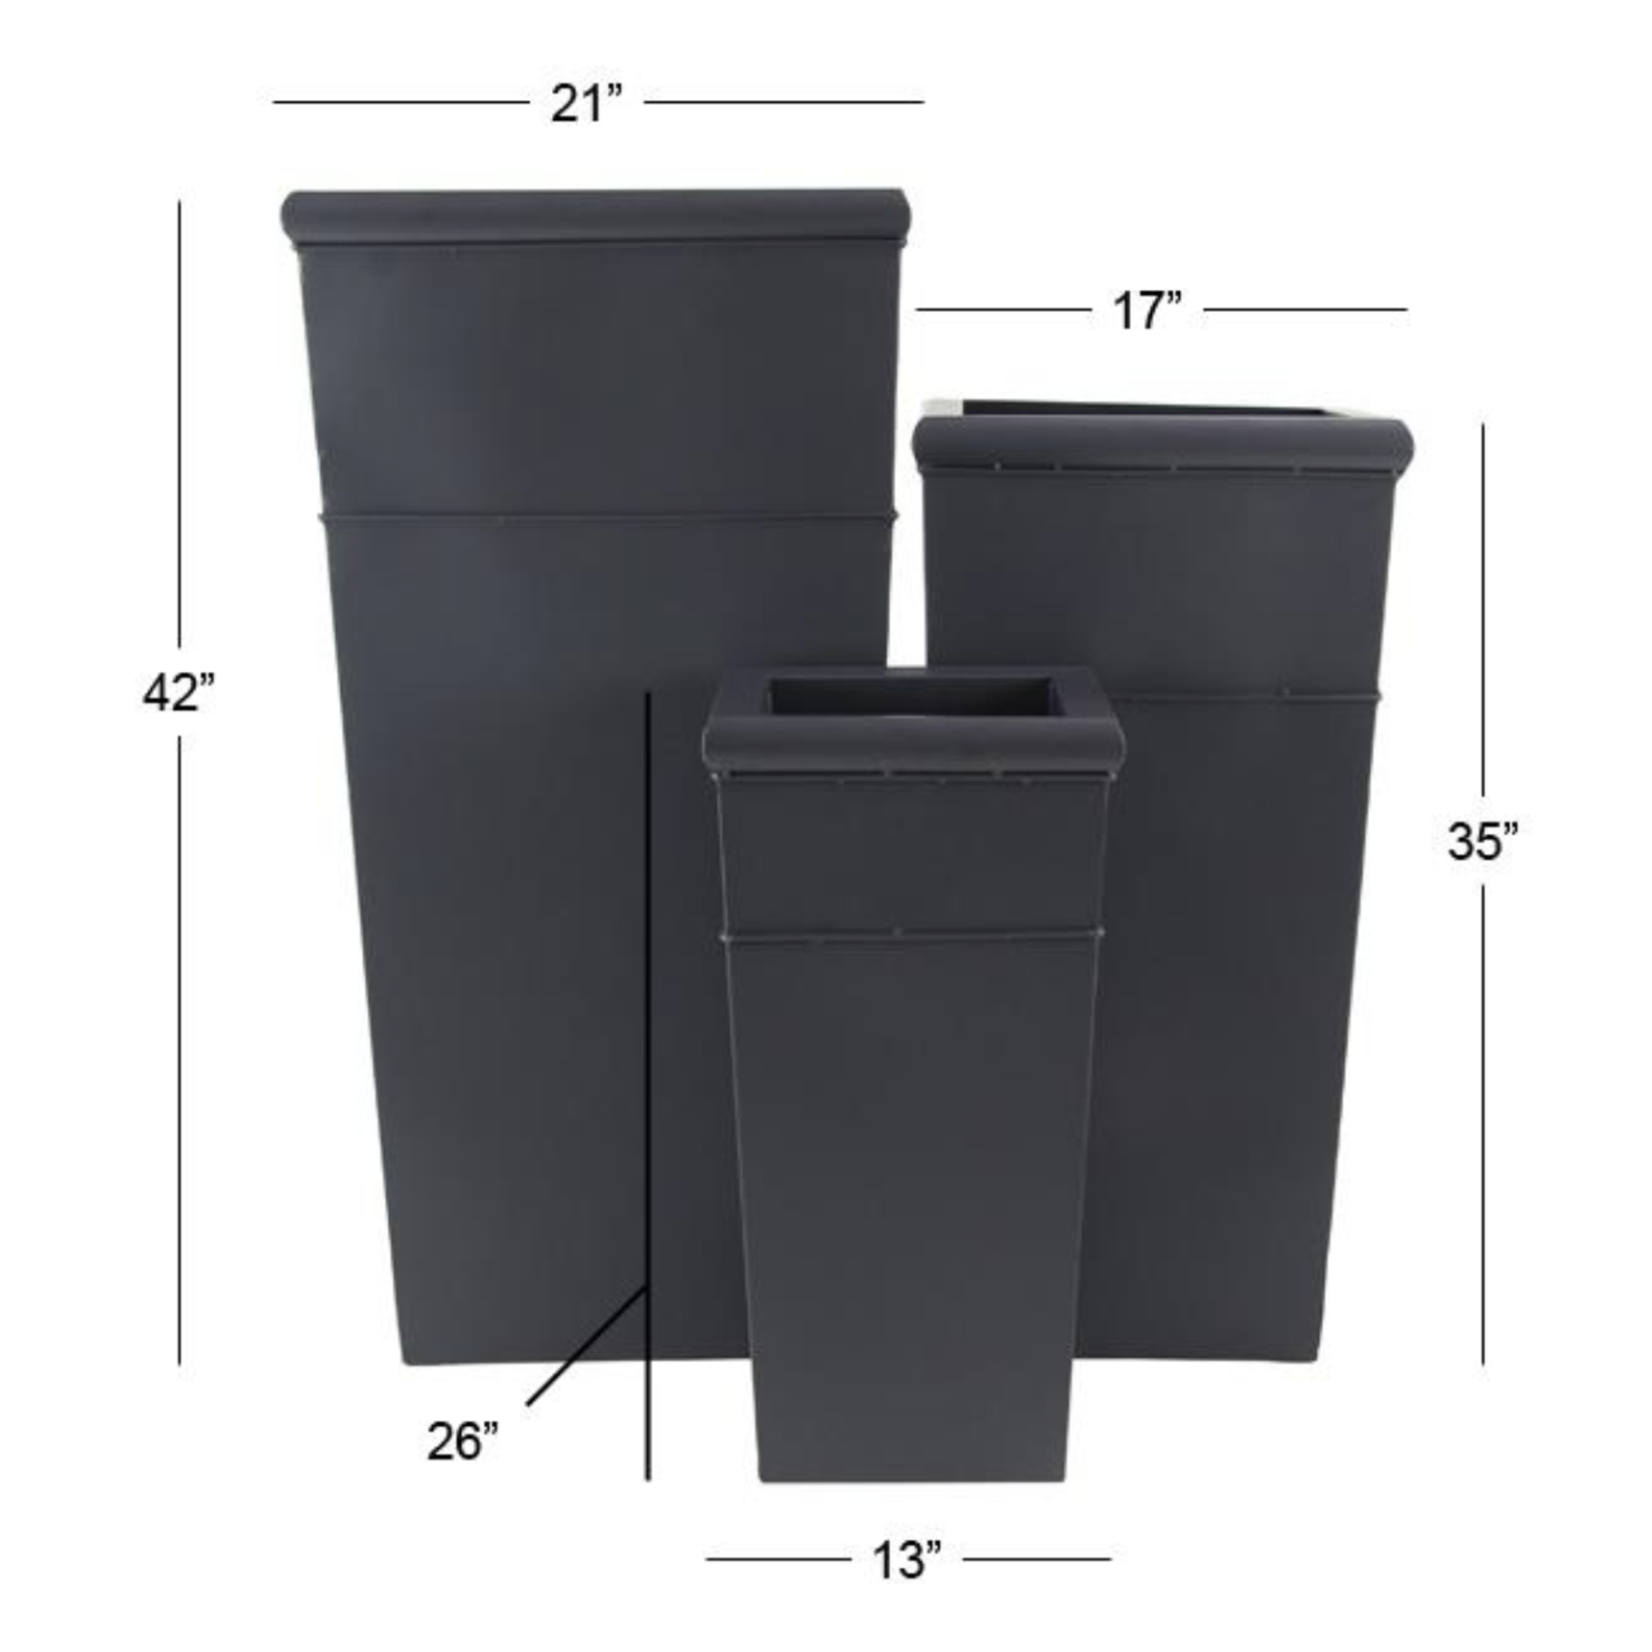 42”H X 21” X 21” LARGE GREY TIN TRADITIONAL PLANTER(NOT WATER TIGHT, PRICE PER SIZE, BOX HAS ASSORTMENT)